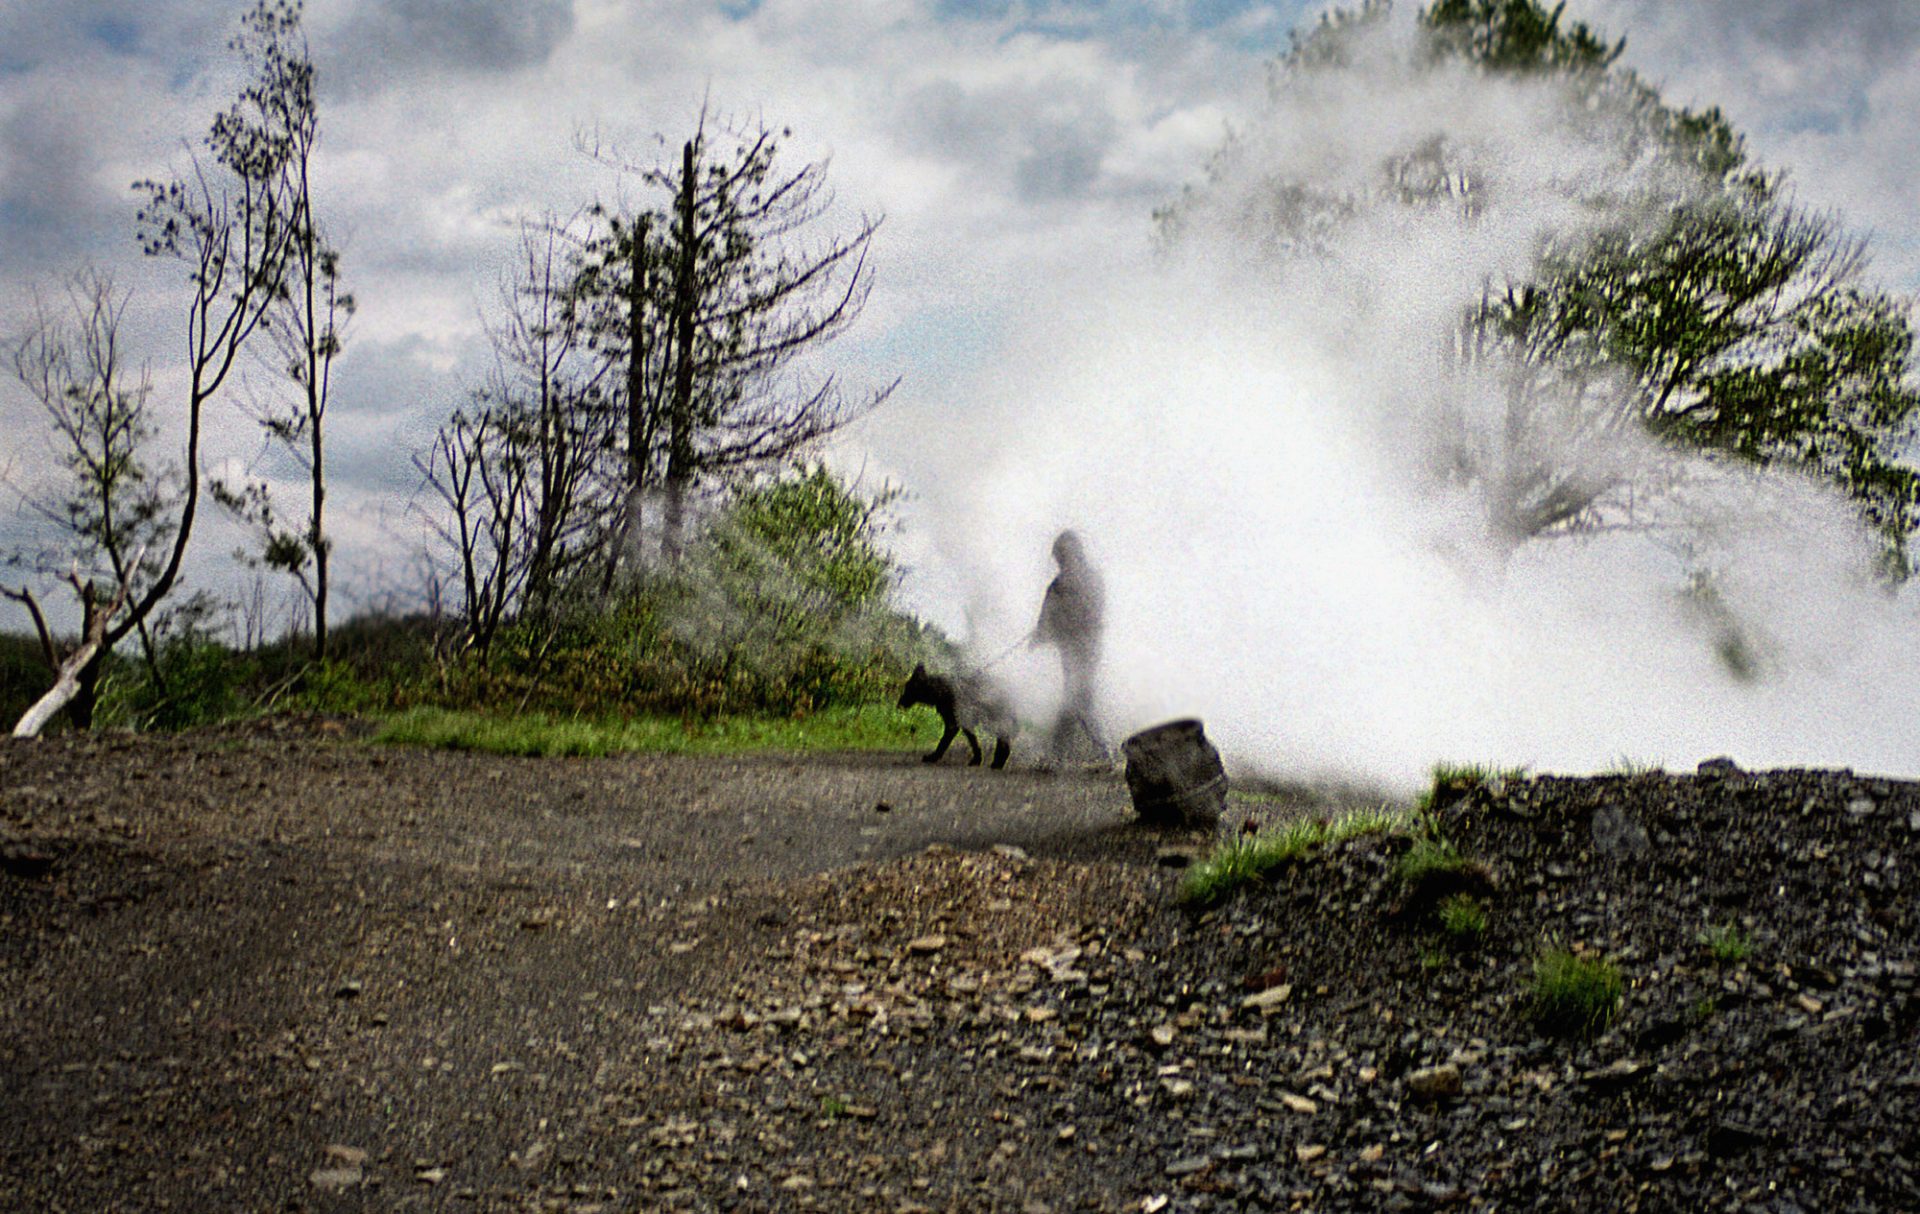 Steam from the Centralia mine fire doesn't keep residents from walking their dogs in the area on May 24, 2002. Evidence of people who have passed through - garbage, beer bottles, old tires - is everywhere in the hilltop area where steam is visible on wet or cooler days.